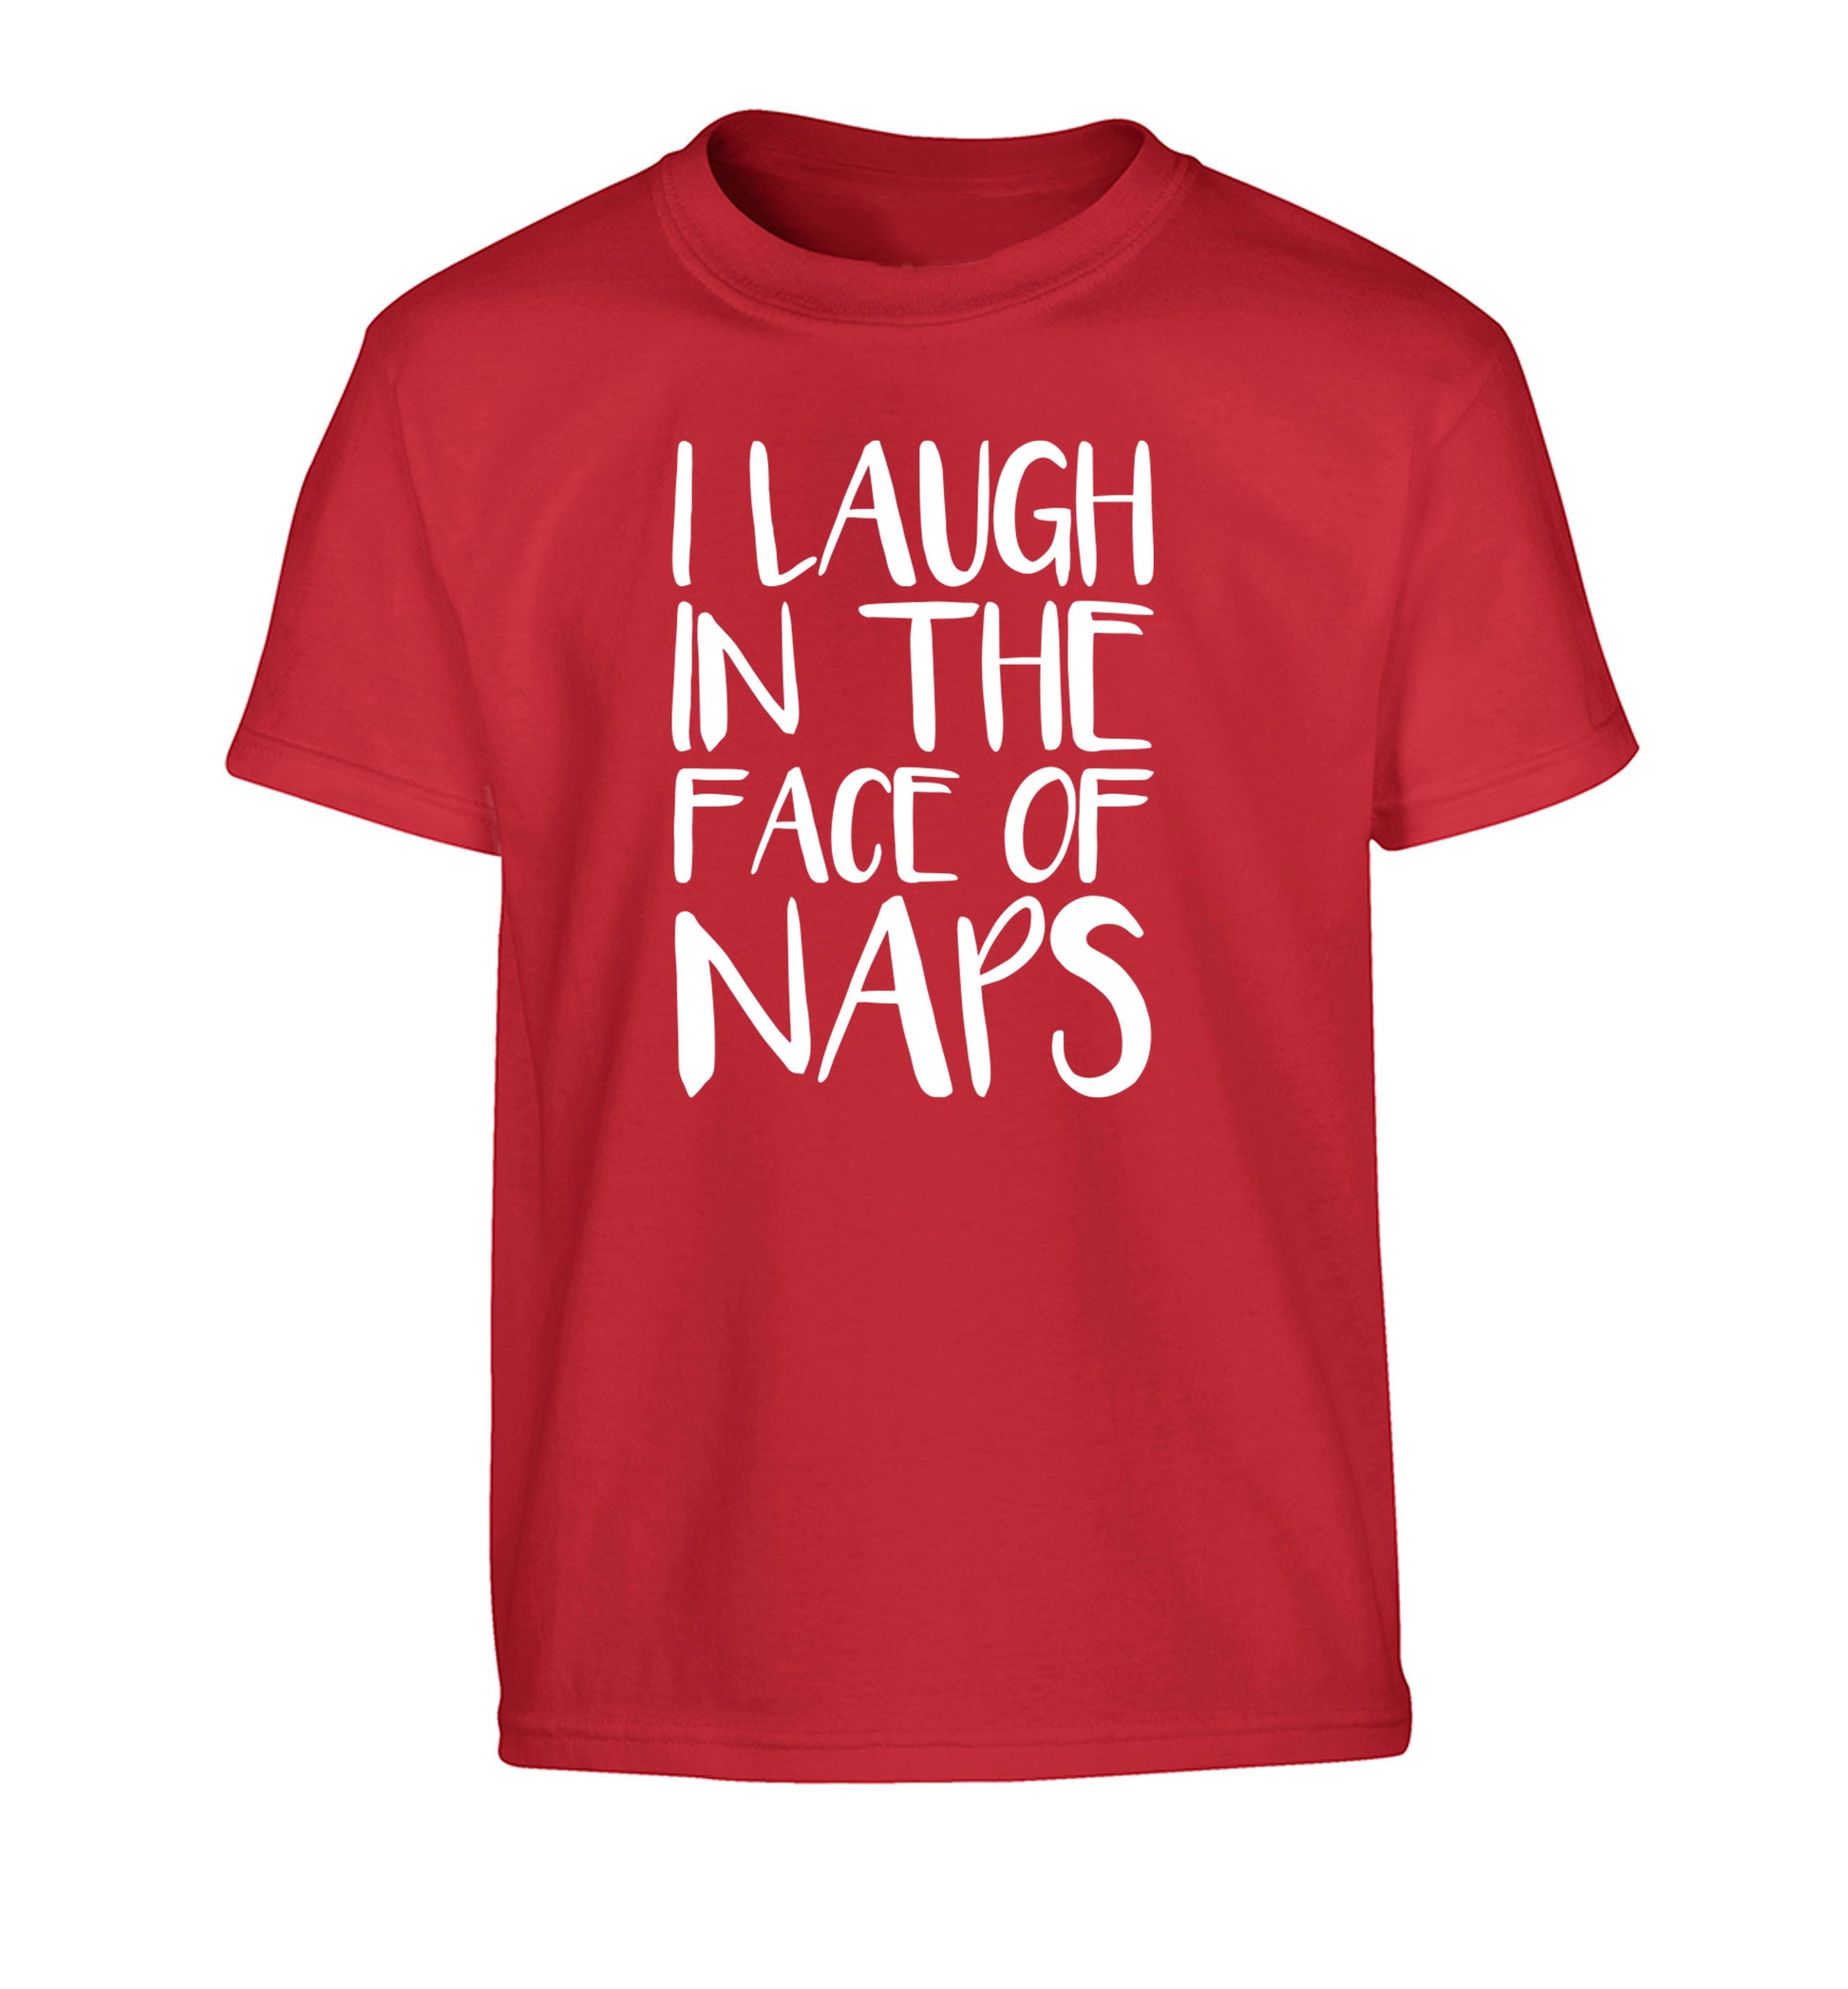 I laugh in the face of naps Children's red Tshirt 12-14 Years